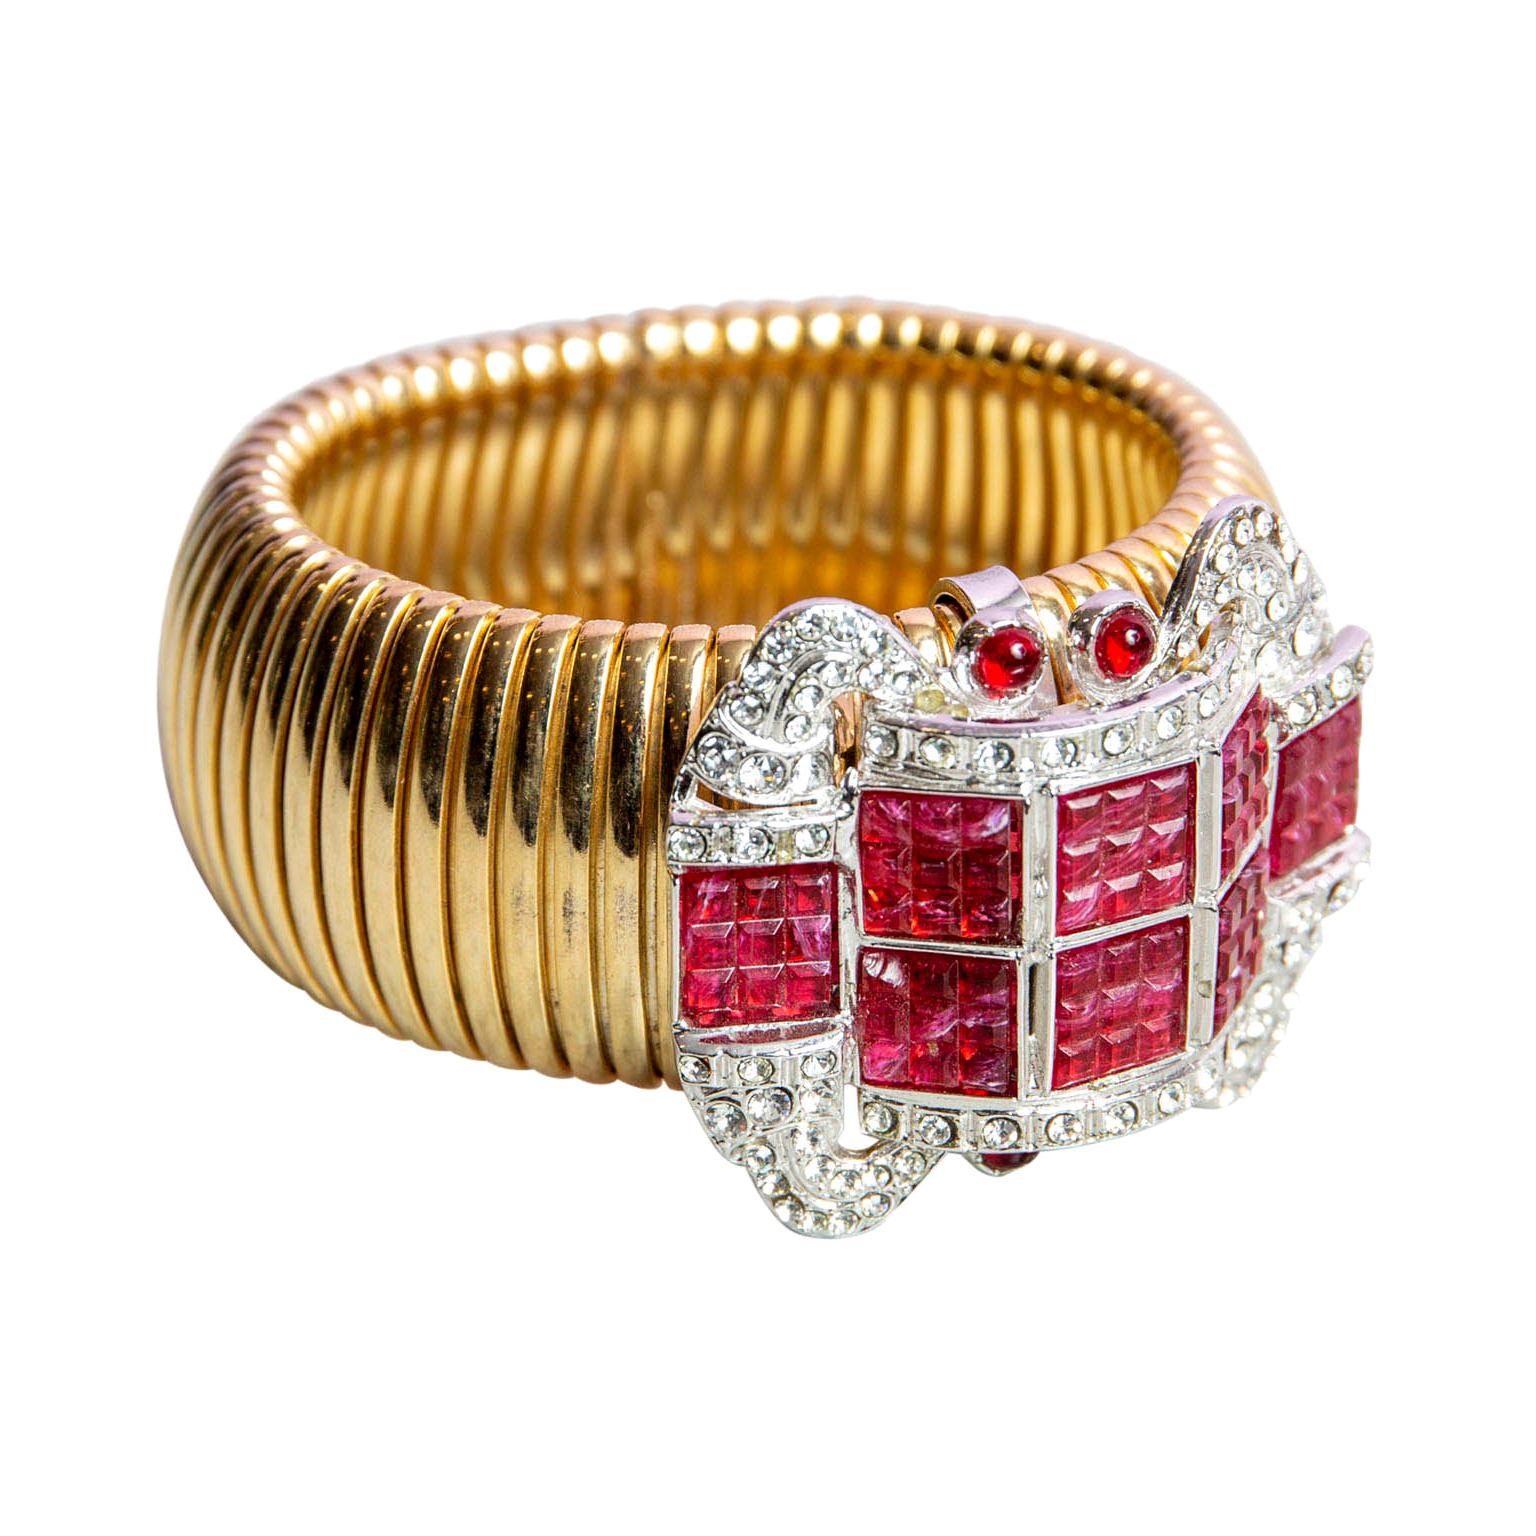 Carlo Zini Tubogas Bracelet with Red Strass and Crystal